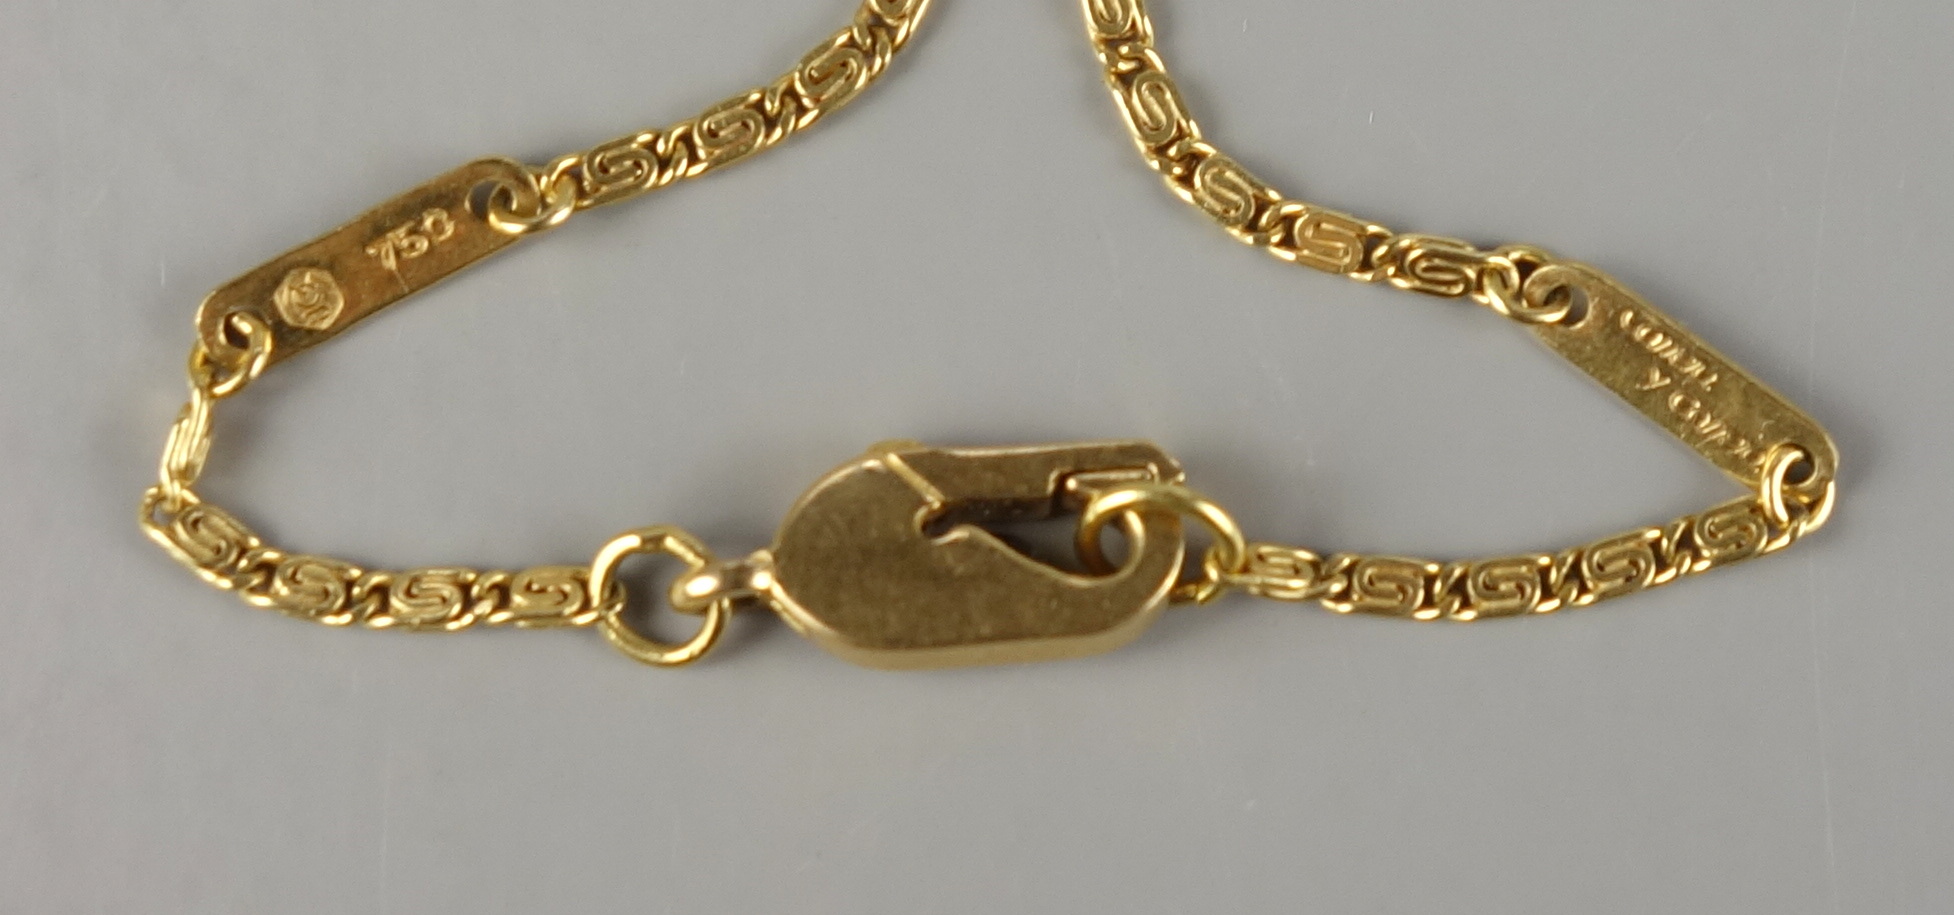 Necklace "Hands", CARRERA Y CARRERA, with 3 navettes diamonds, 18K gold - Image 4 of 4